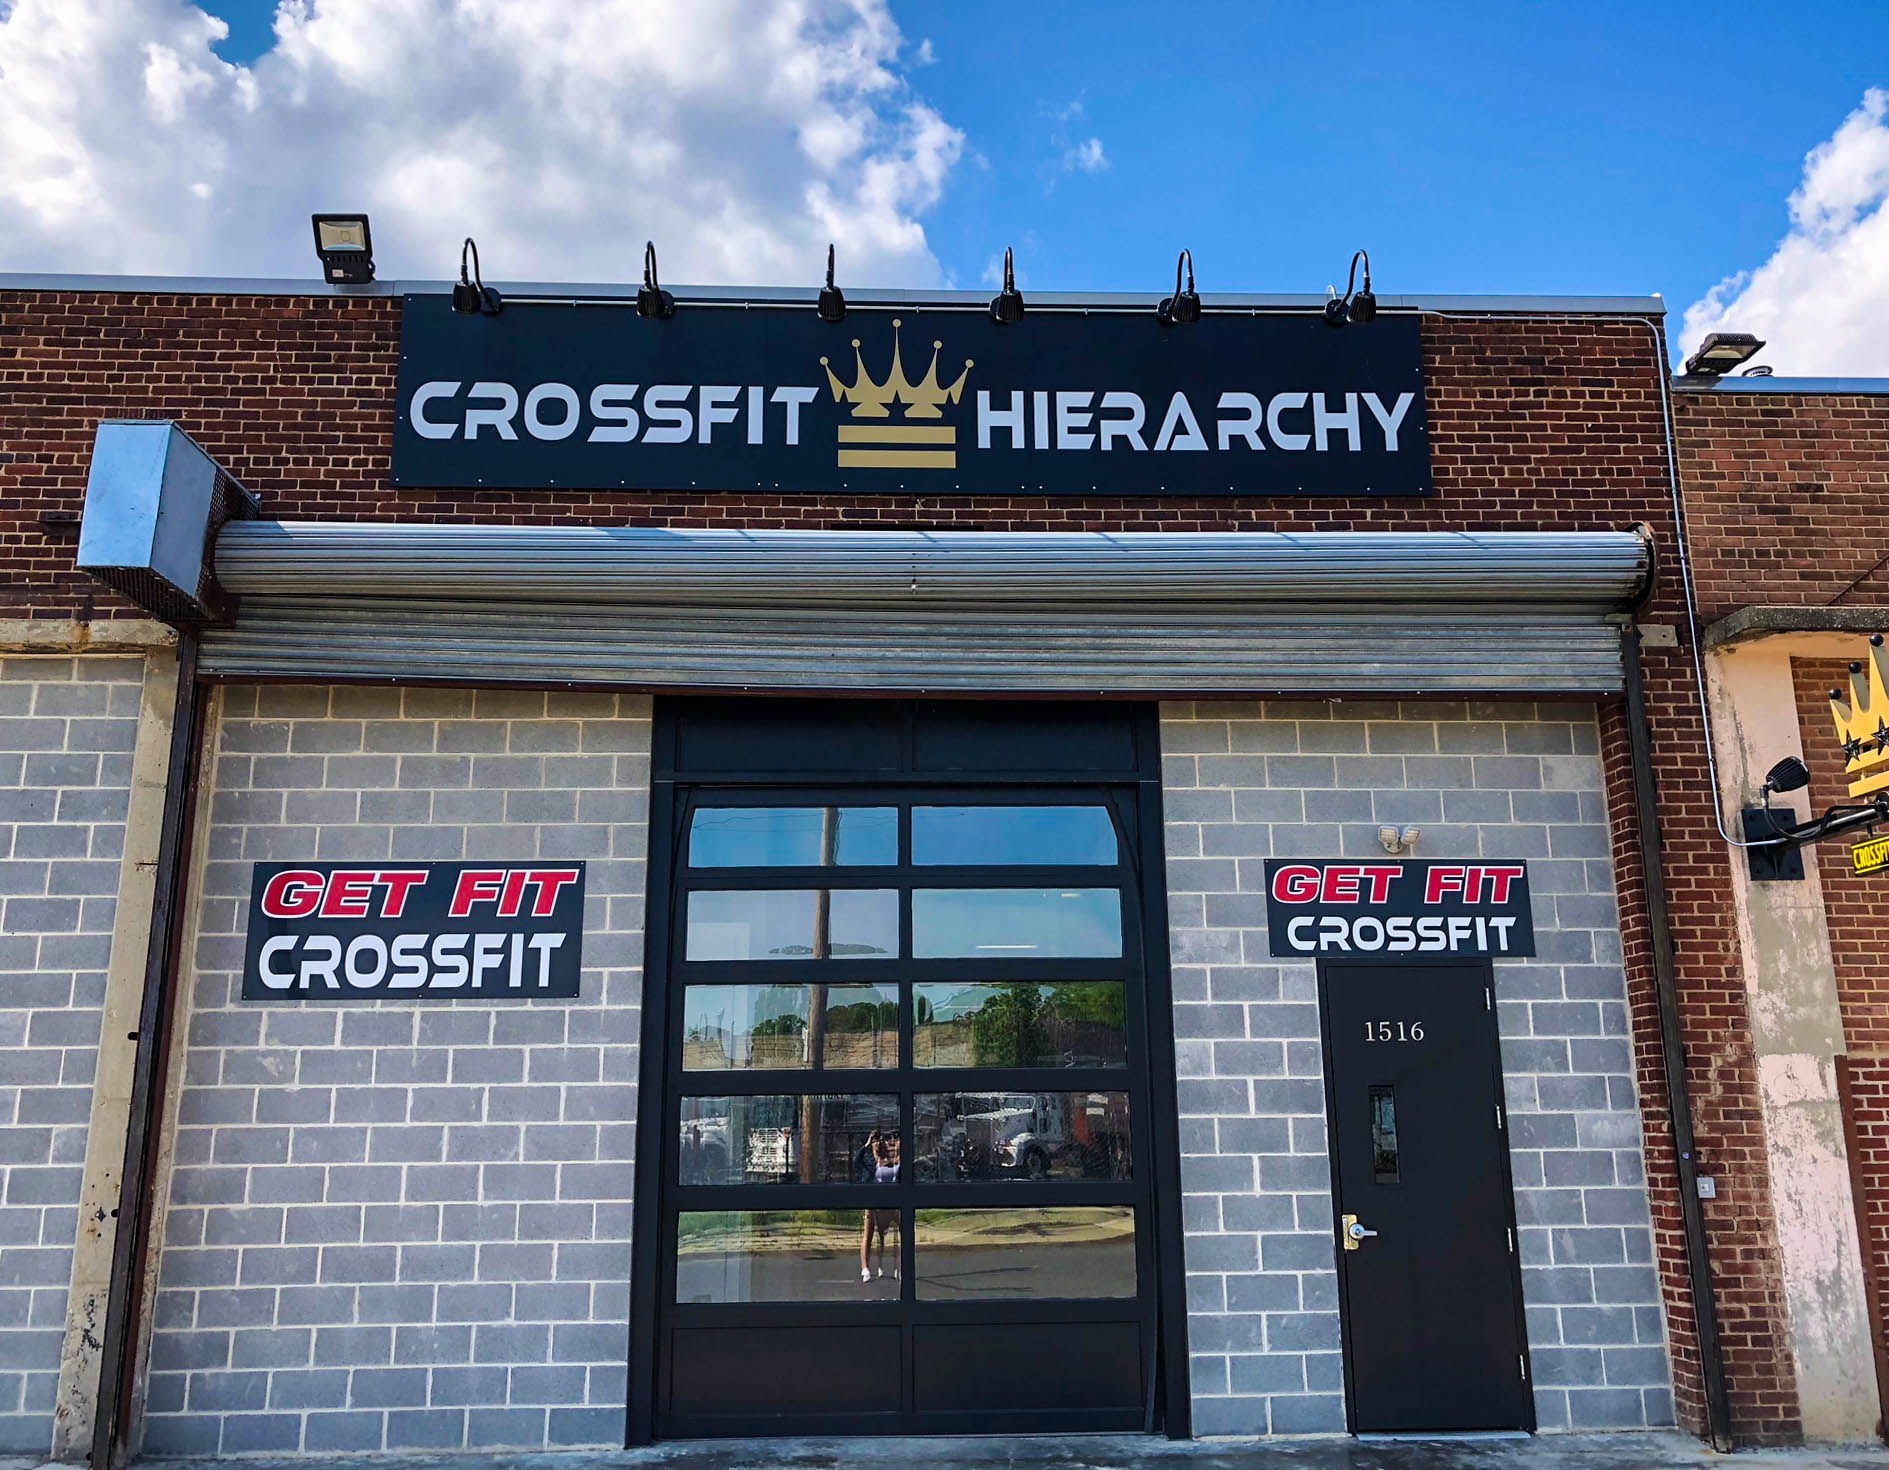 Hect Warehouse - Crossfit Hierarchy